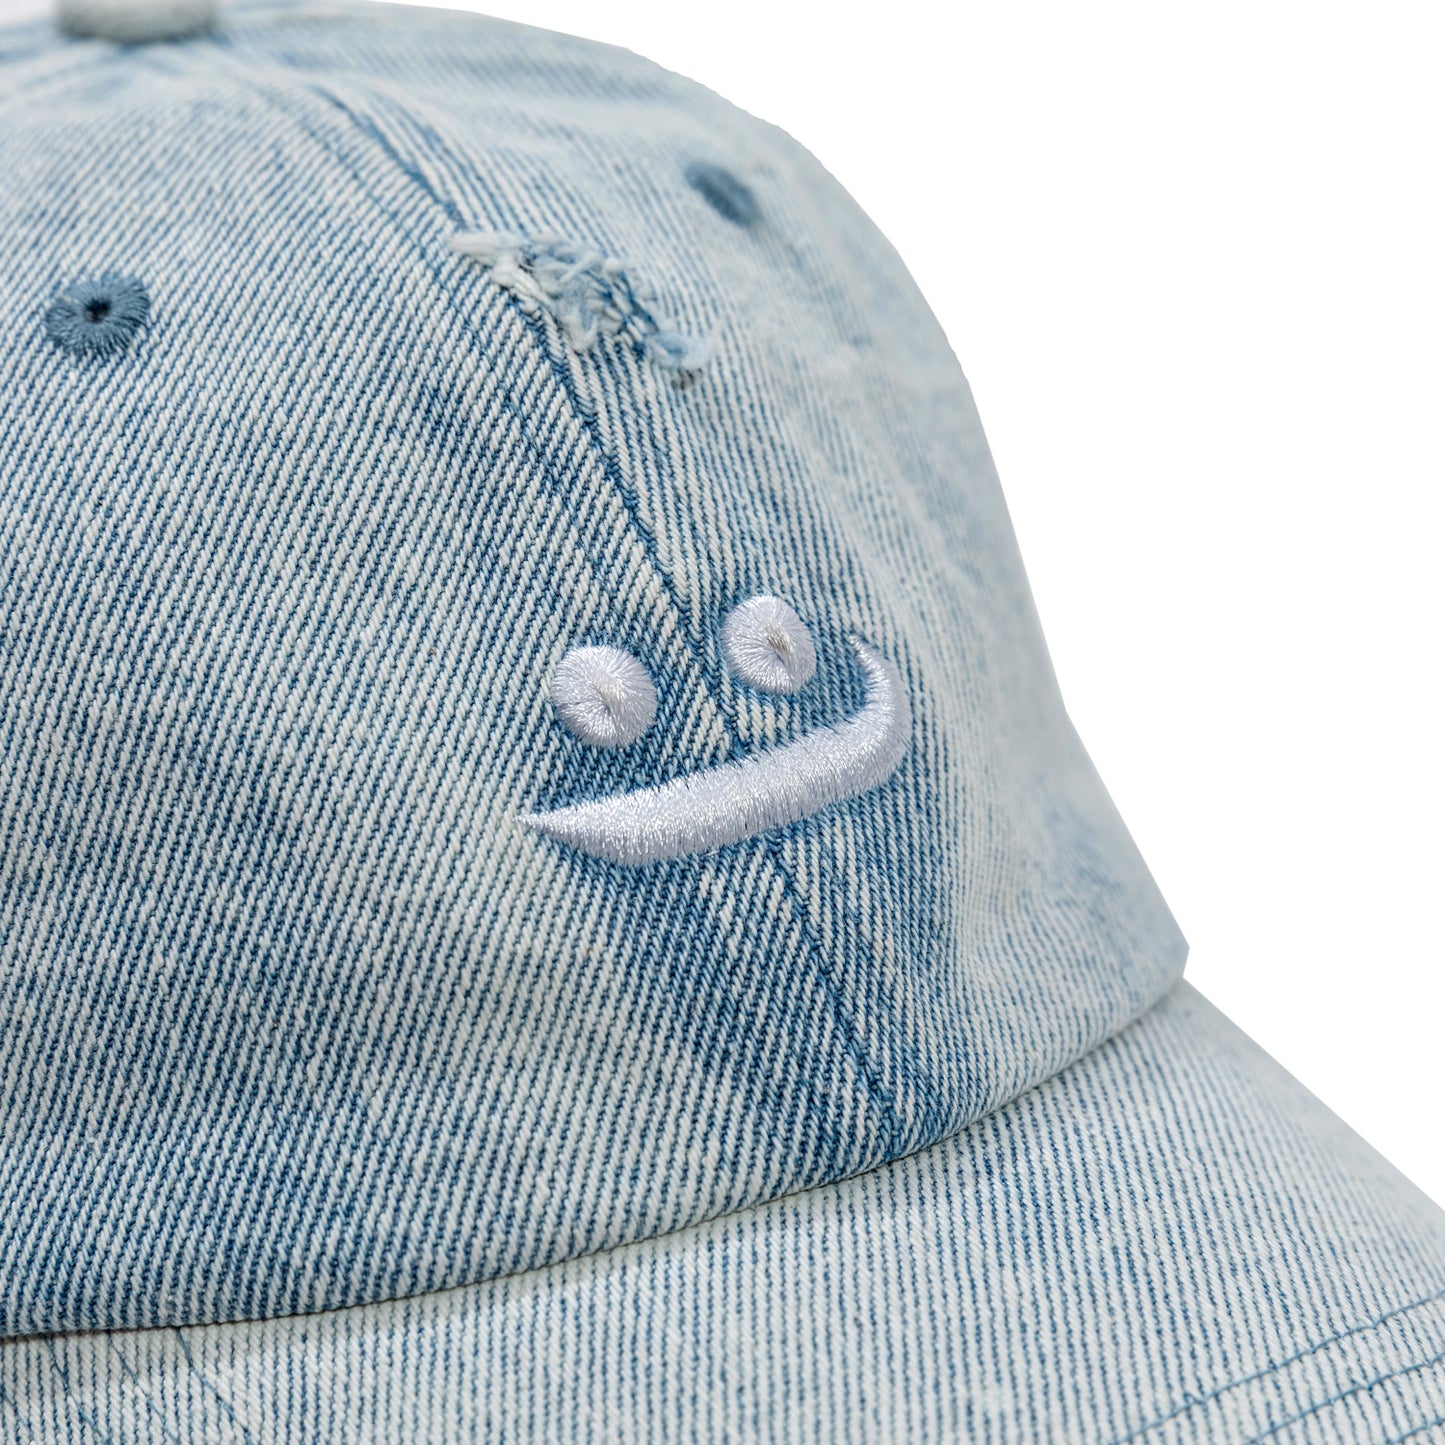 Denim cap, distressed, blue, washed, modern, baseball cap, man, woman, unisex, embroidery, ripped